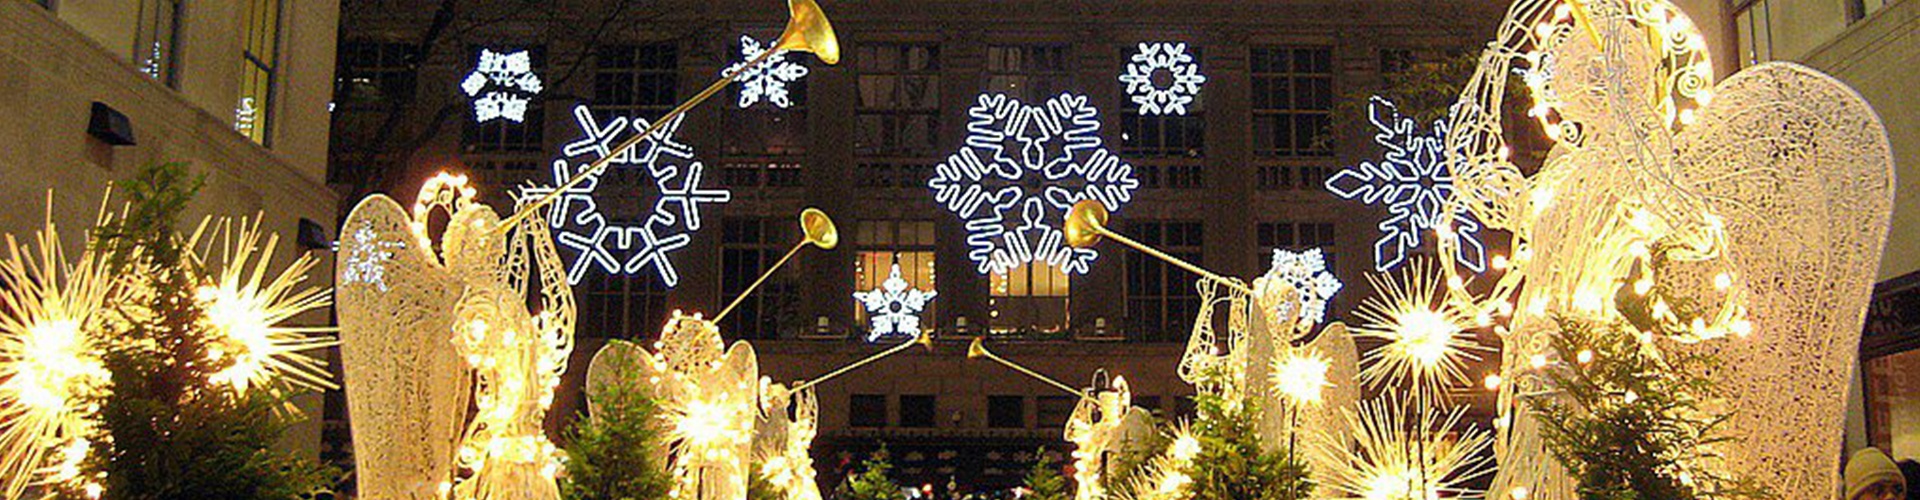 Top 5: Best Spots to Spy Great Holiday Decorations